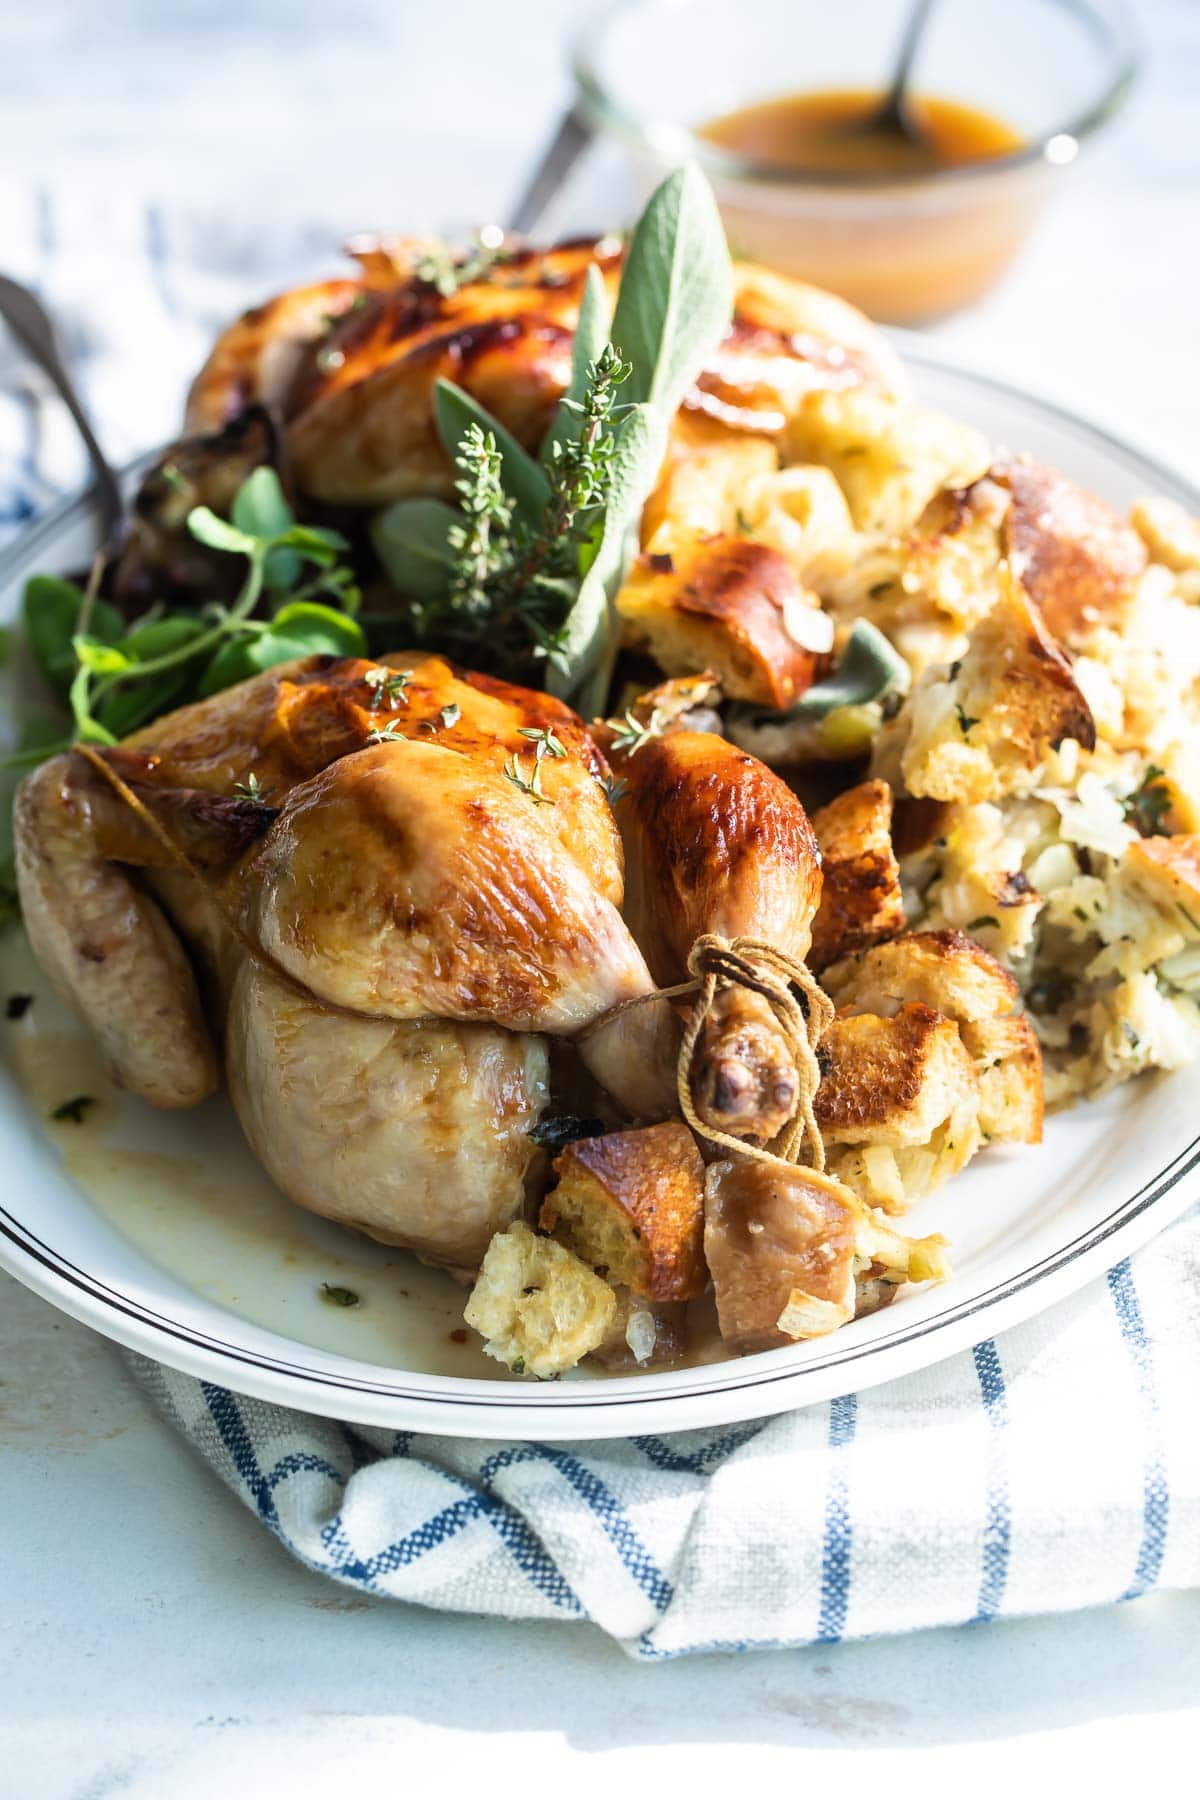 A whole Cornish hen on a gray plate with stuffing.